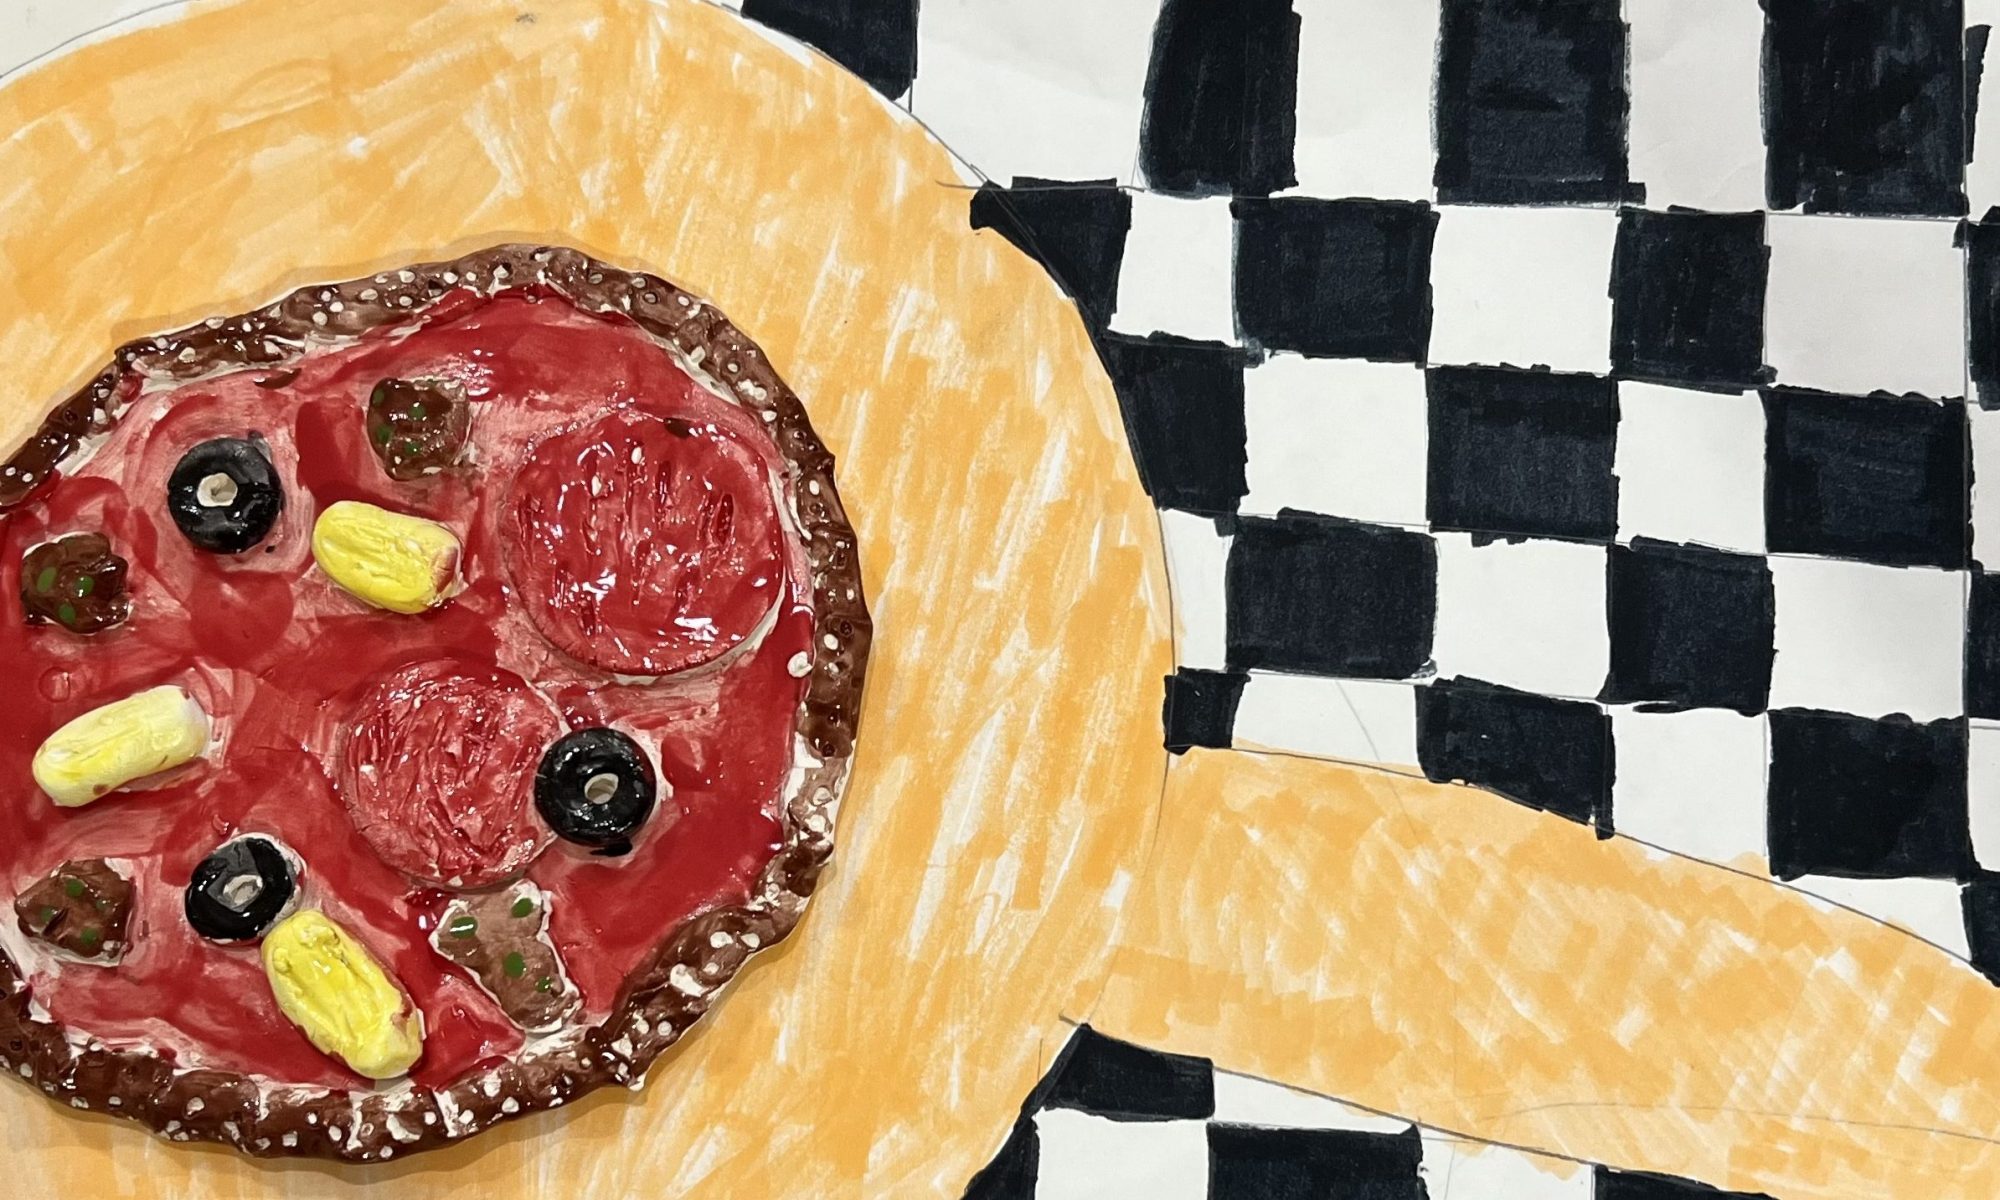 clay-pizza-made-with-dairy-free-cheese-created-by-fourth-grade-author-and-artist-olivia-daring